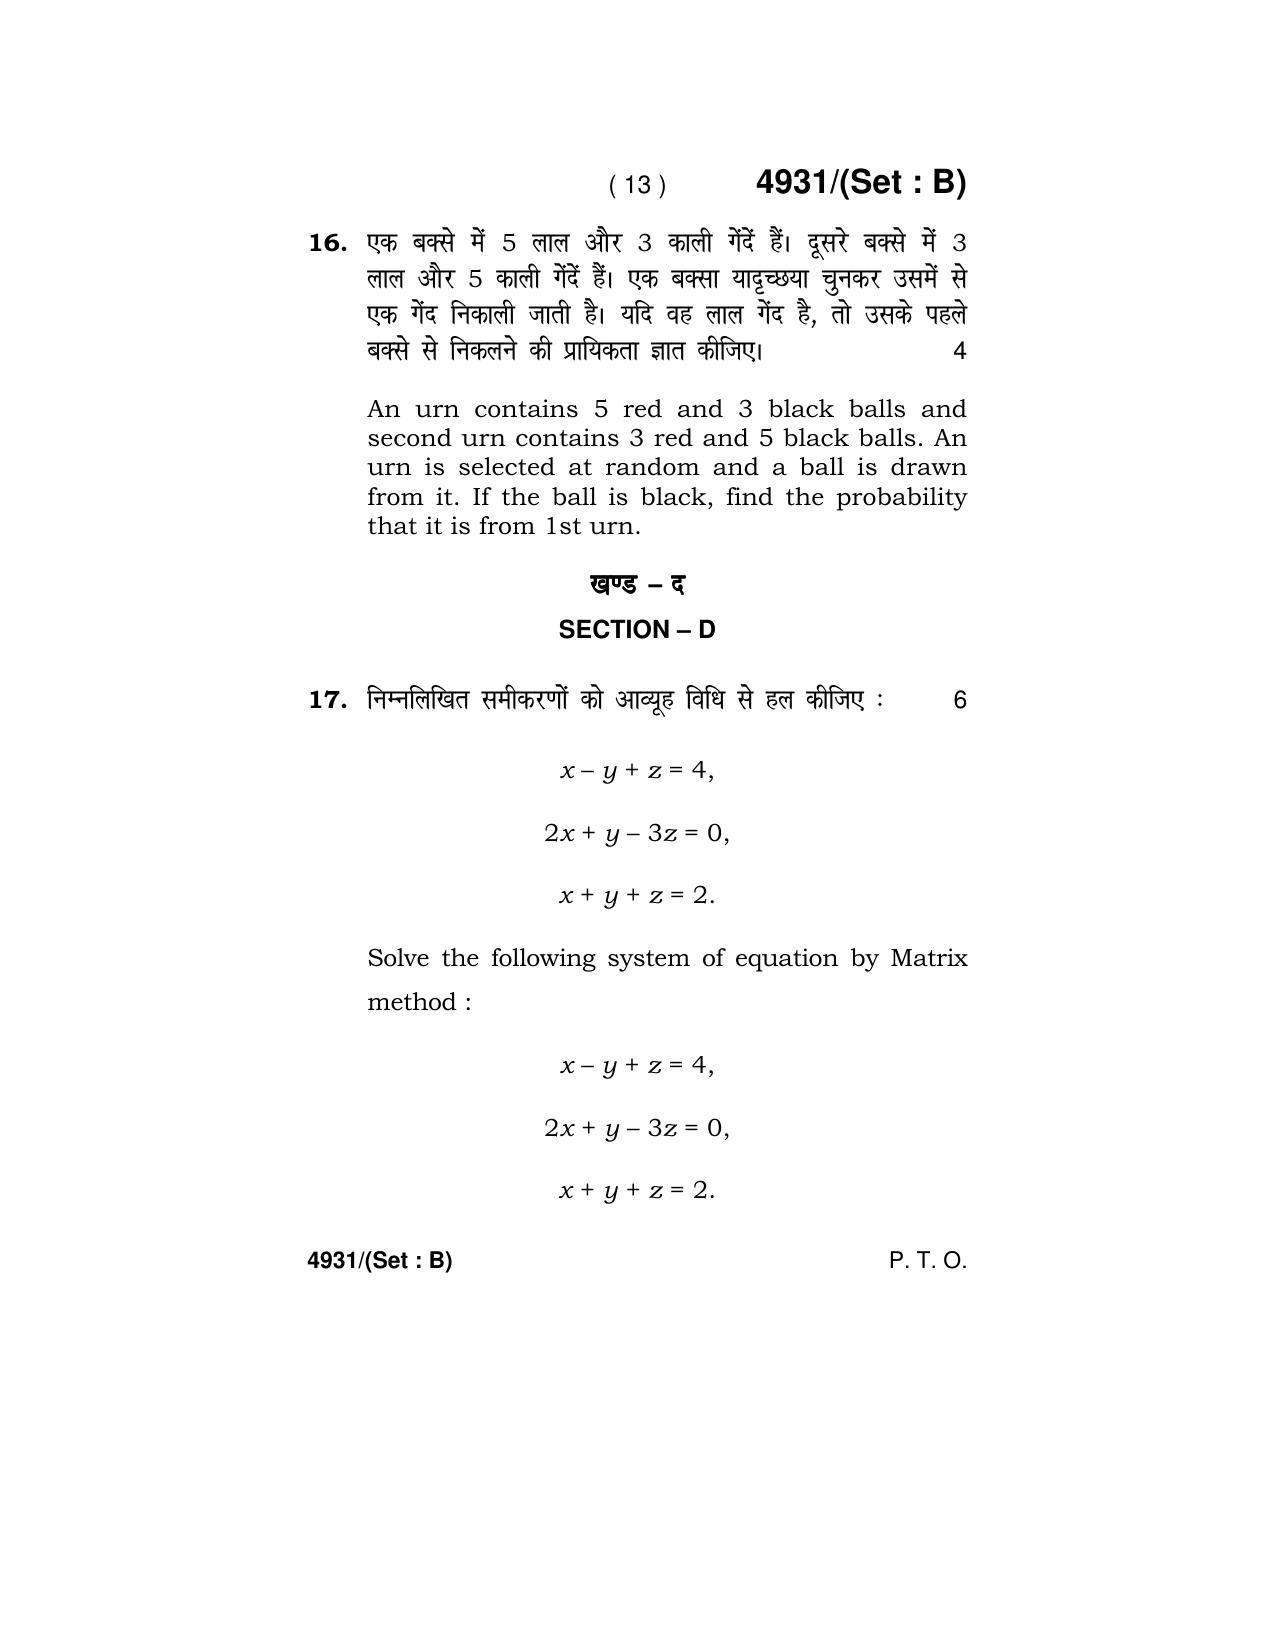 Haryana Board HBSE Class 12 Mathematics 2020 Question Paper - Page 29